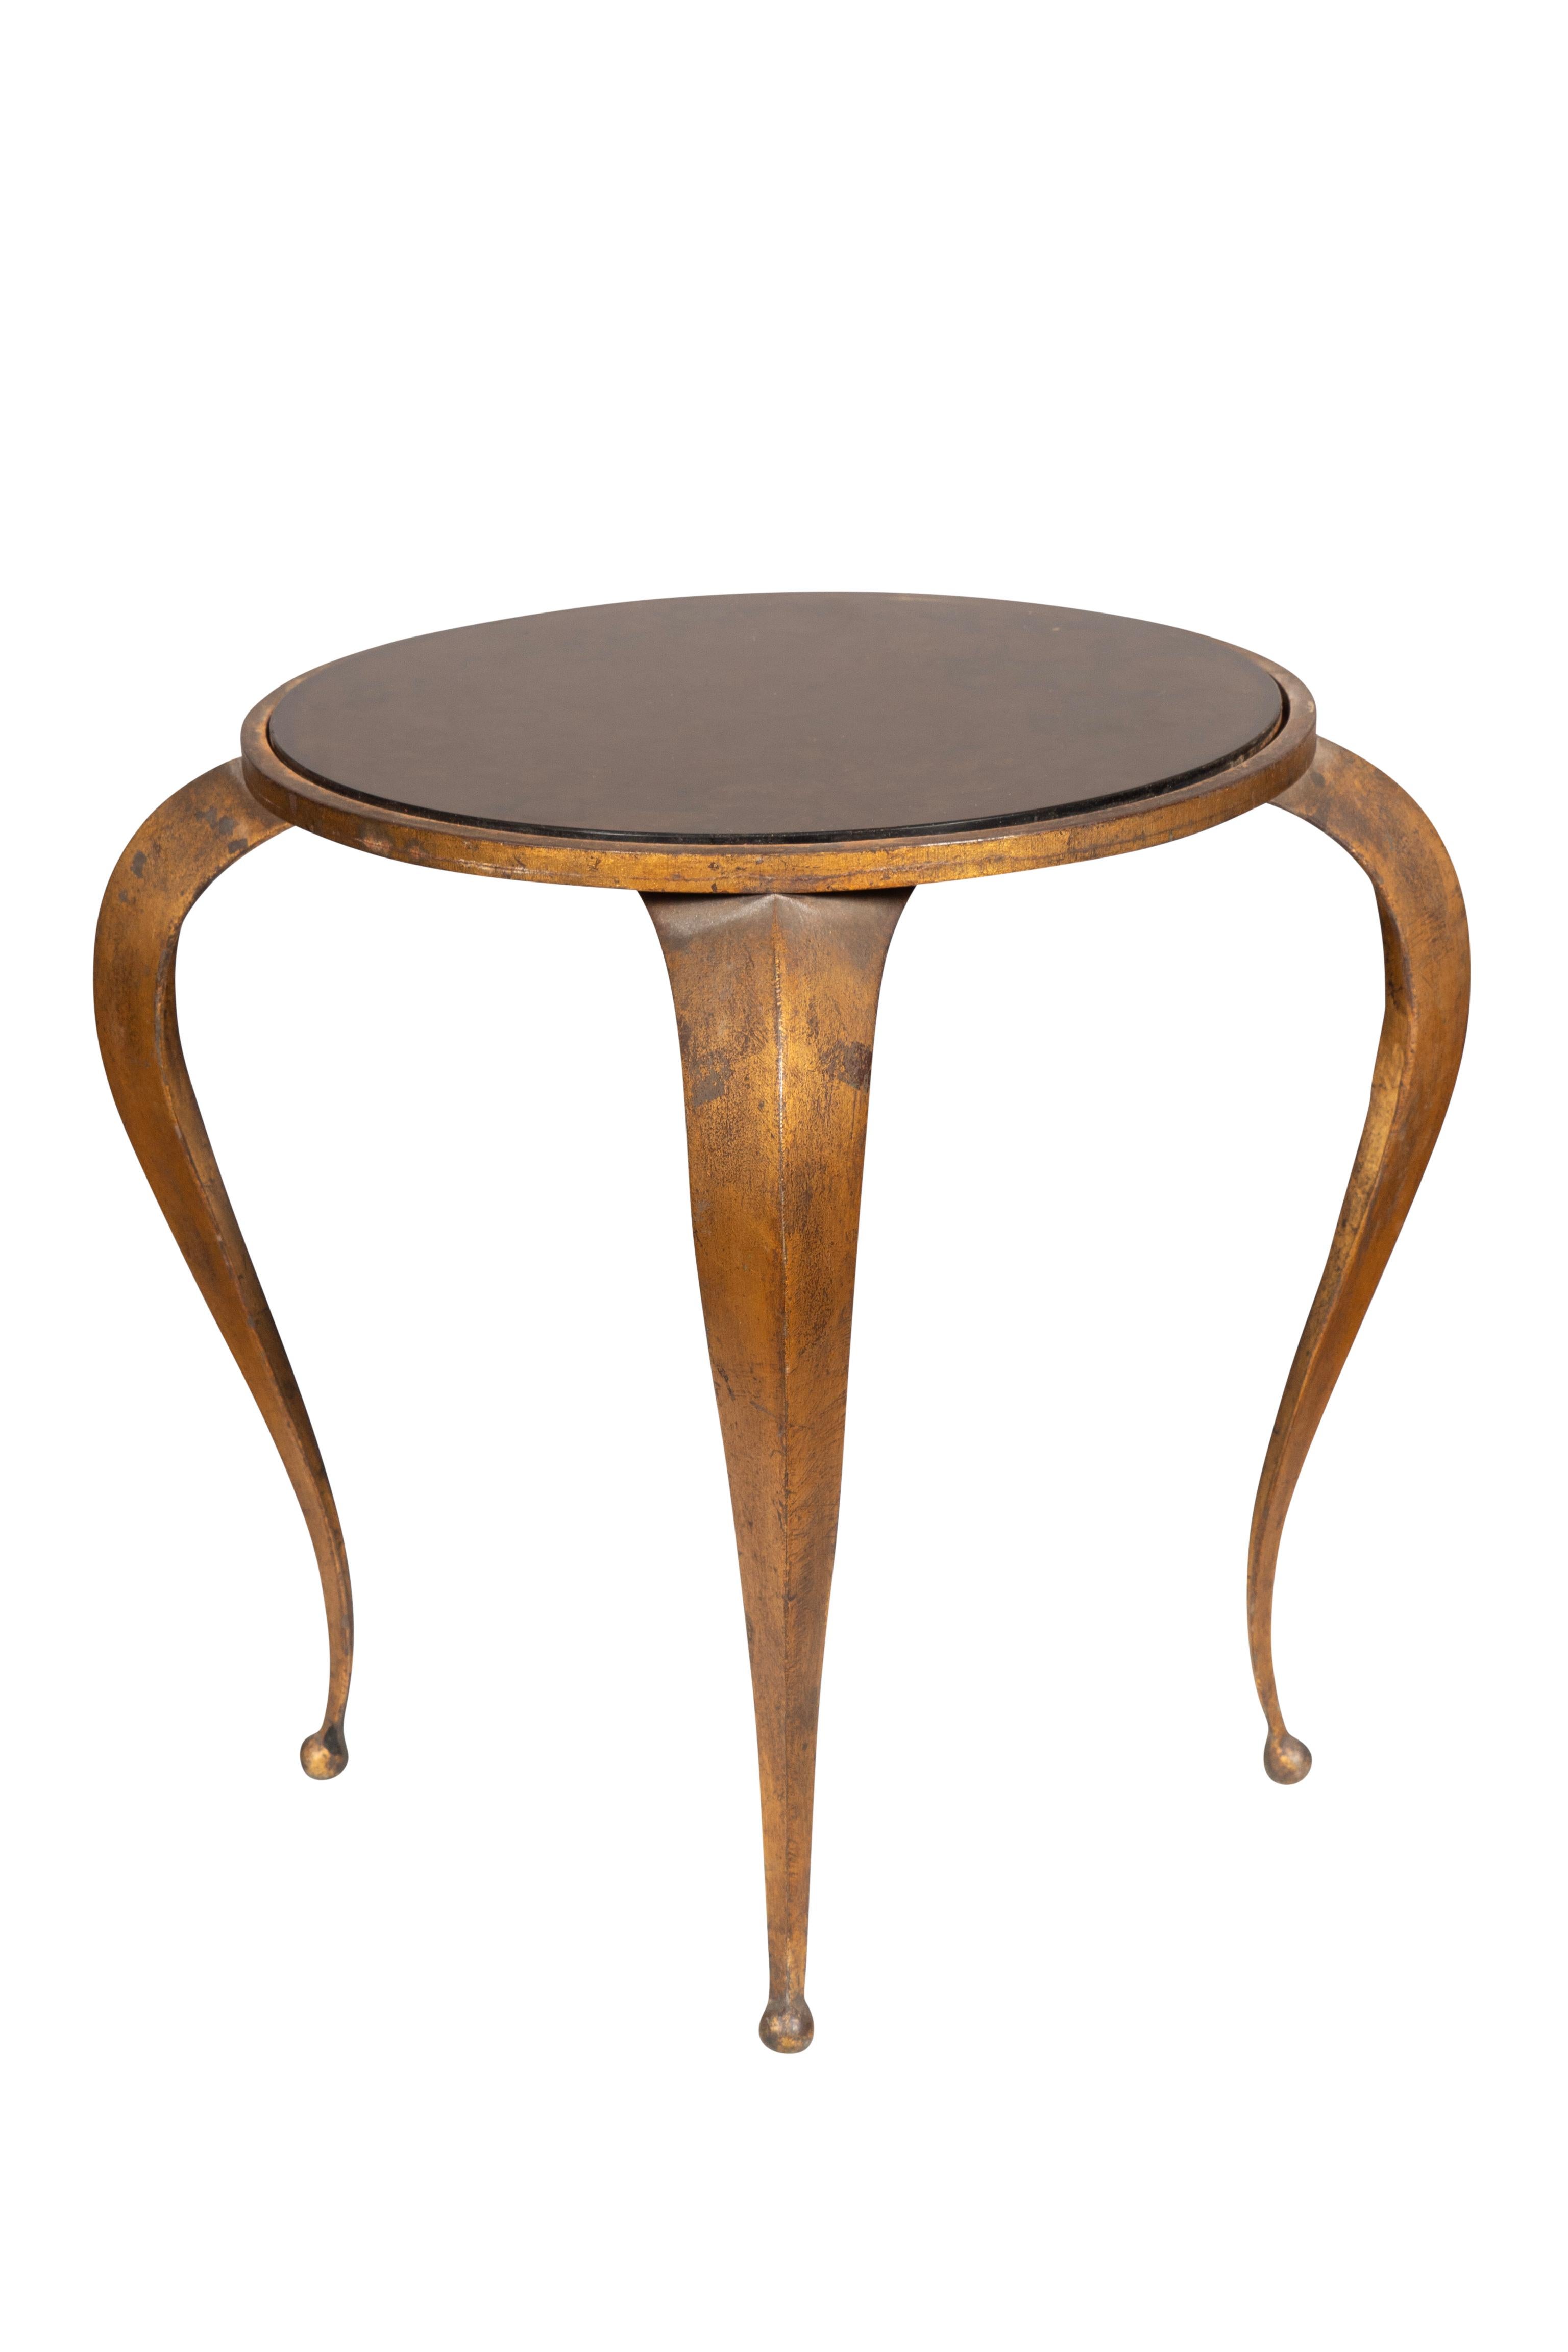 Circular glass top with faux tortoise painted in reverse. Four curved legs with bronze finish.